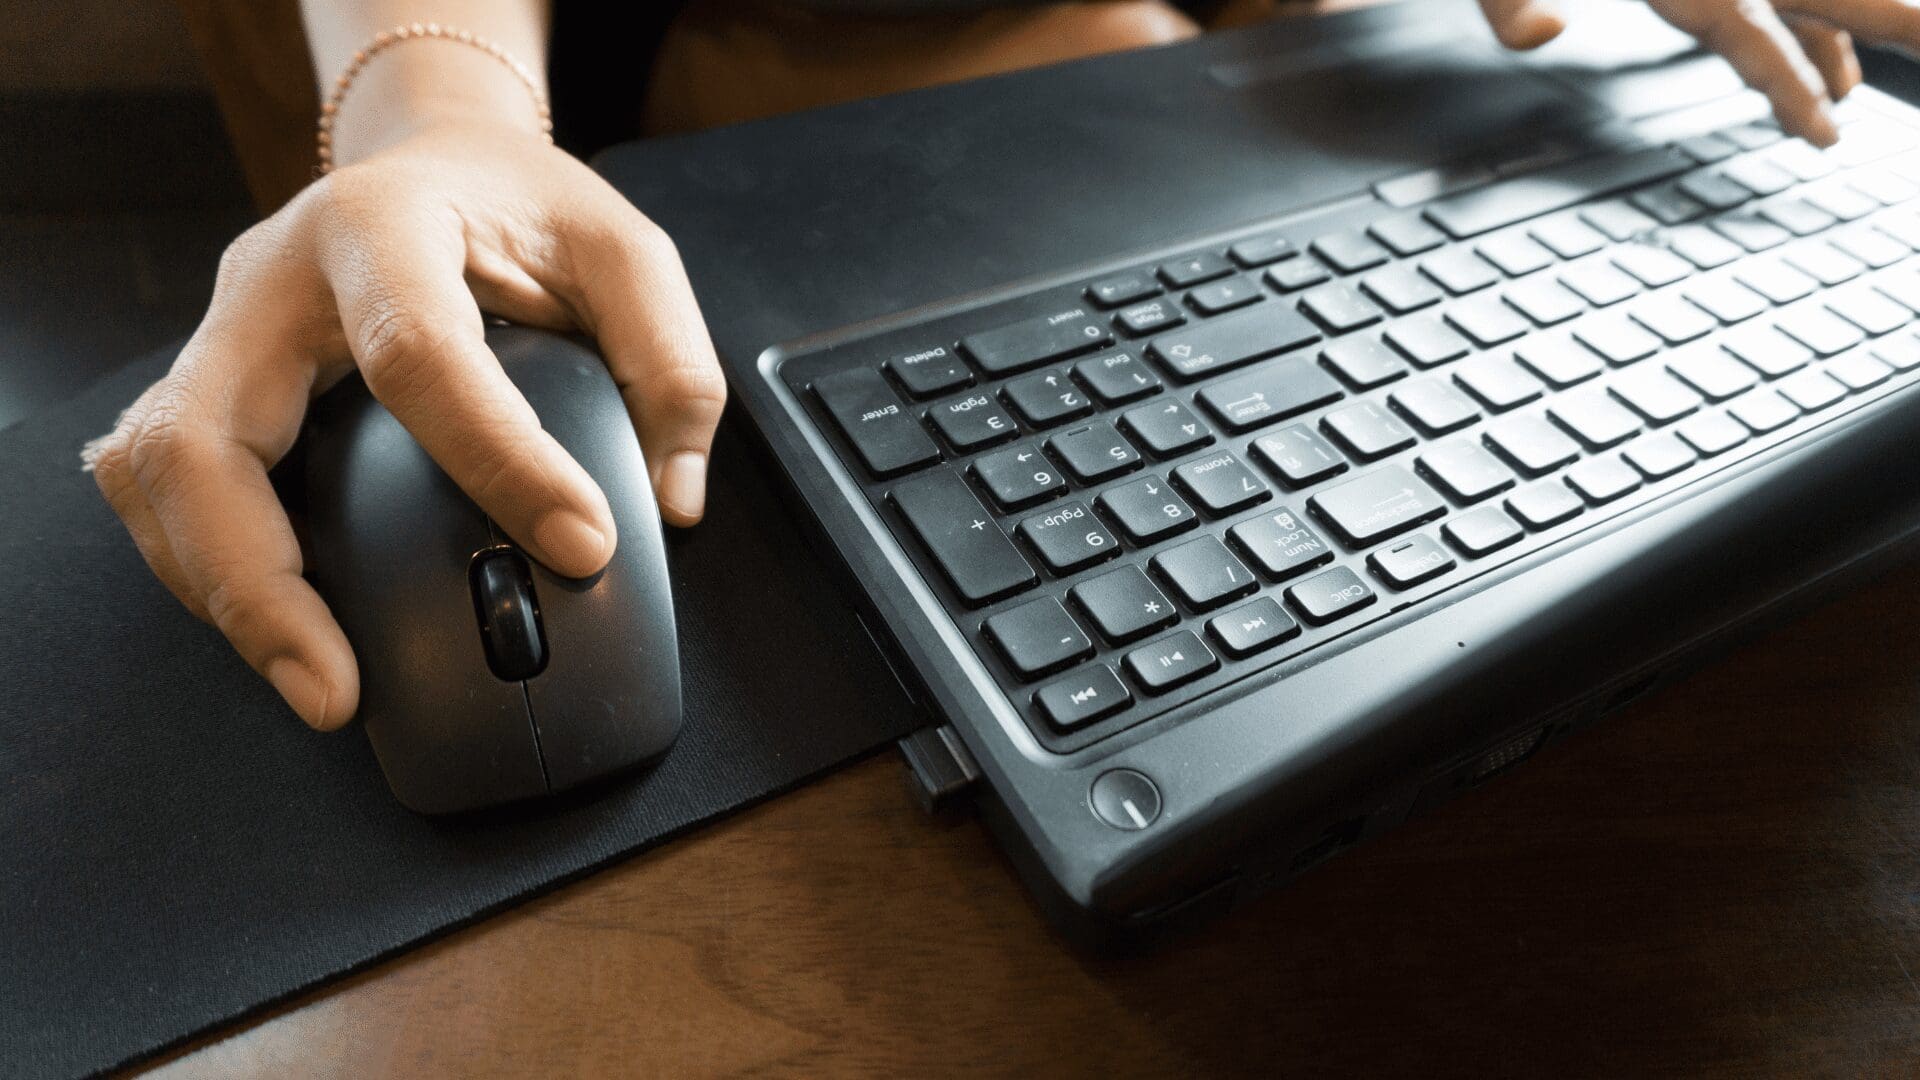 Writing on a laptop using a mouse